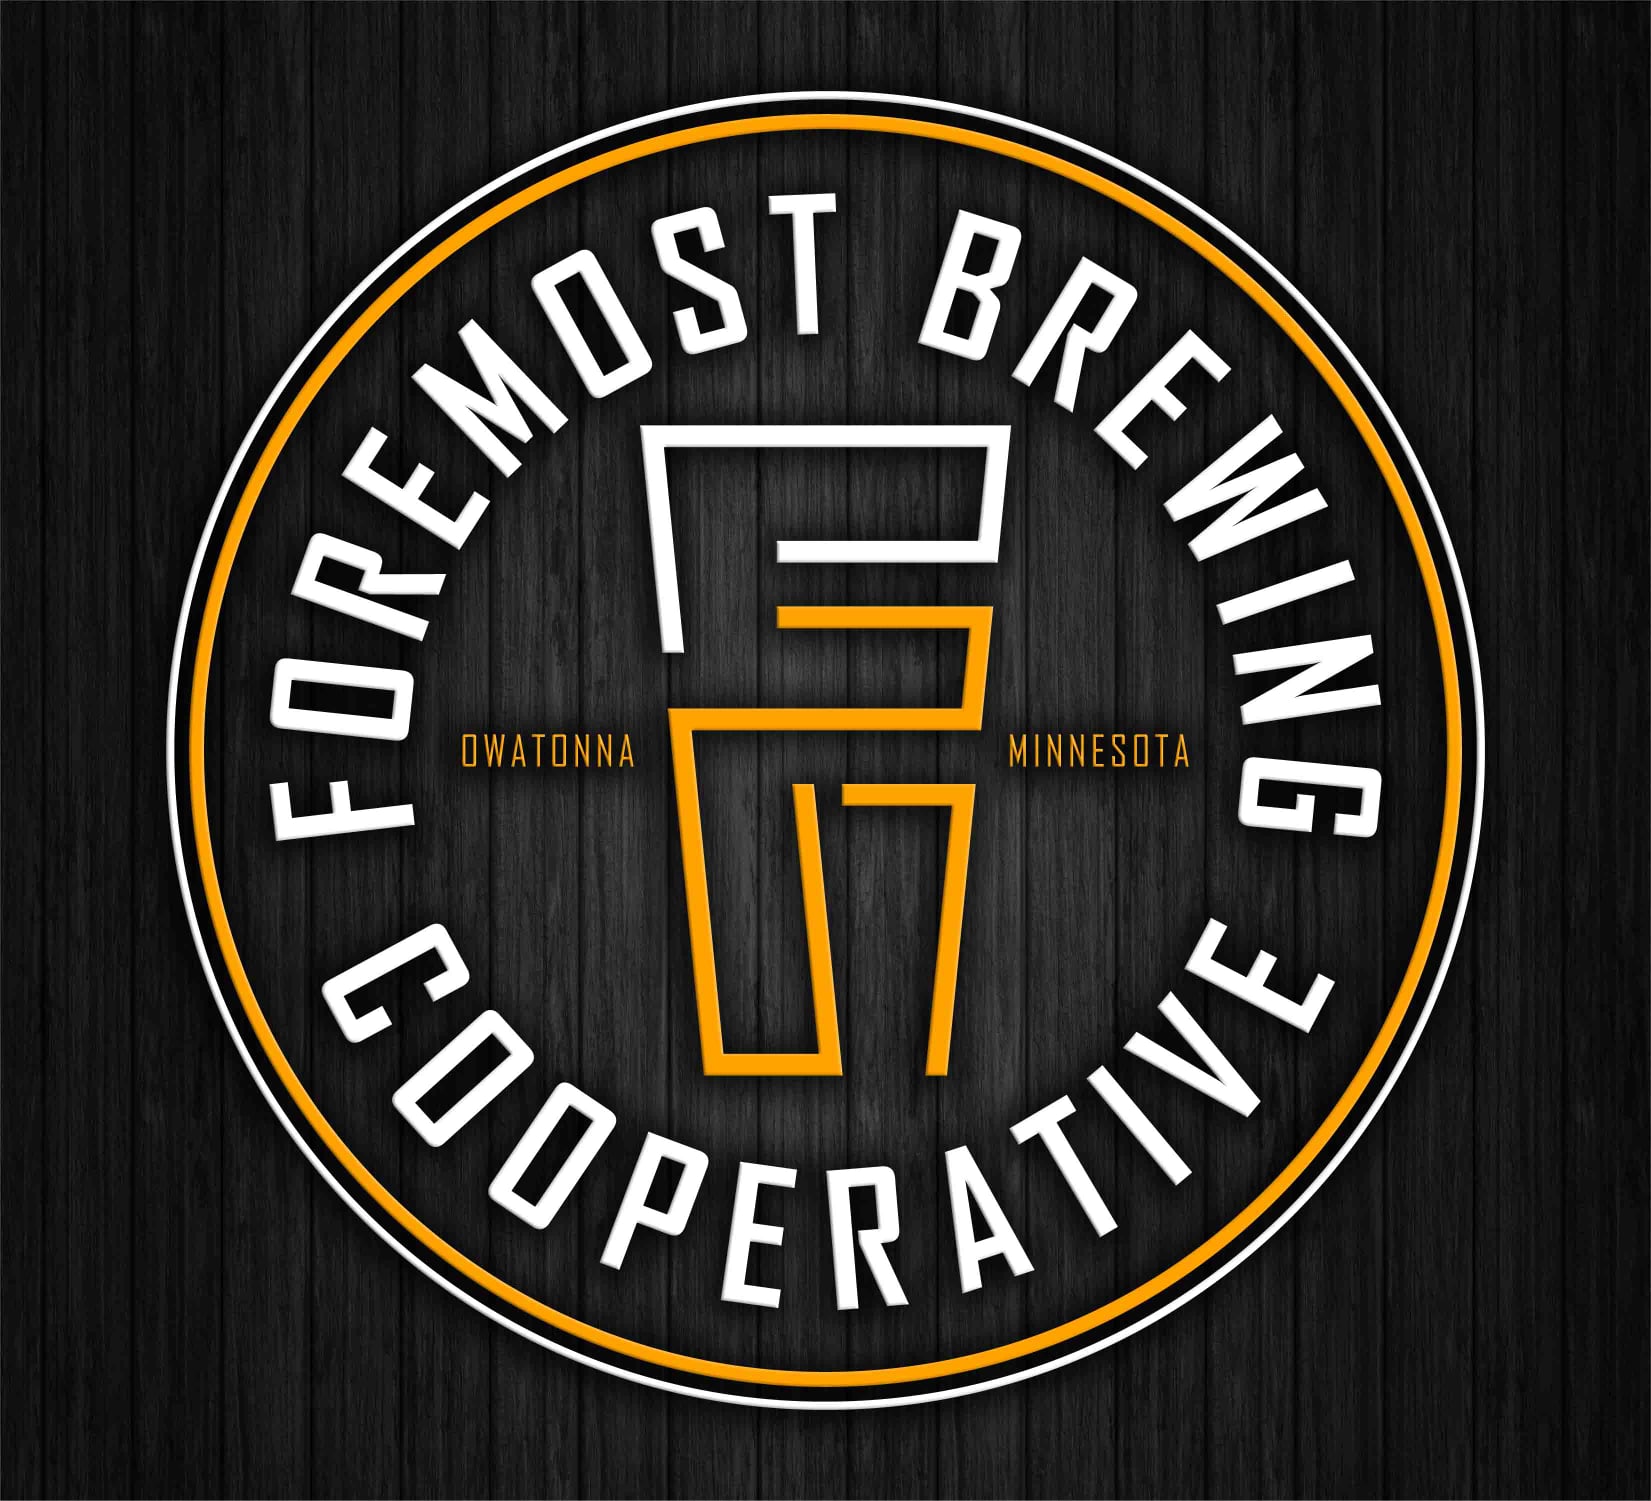 Foremost Brewing Cooperative